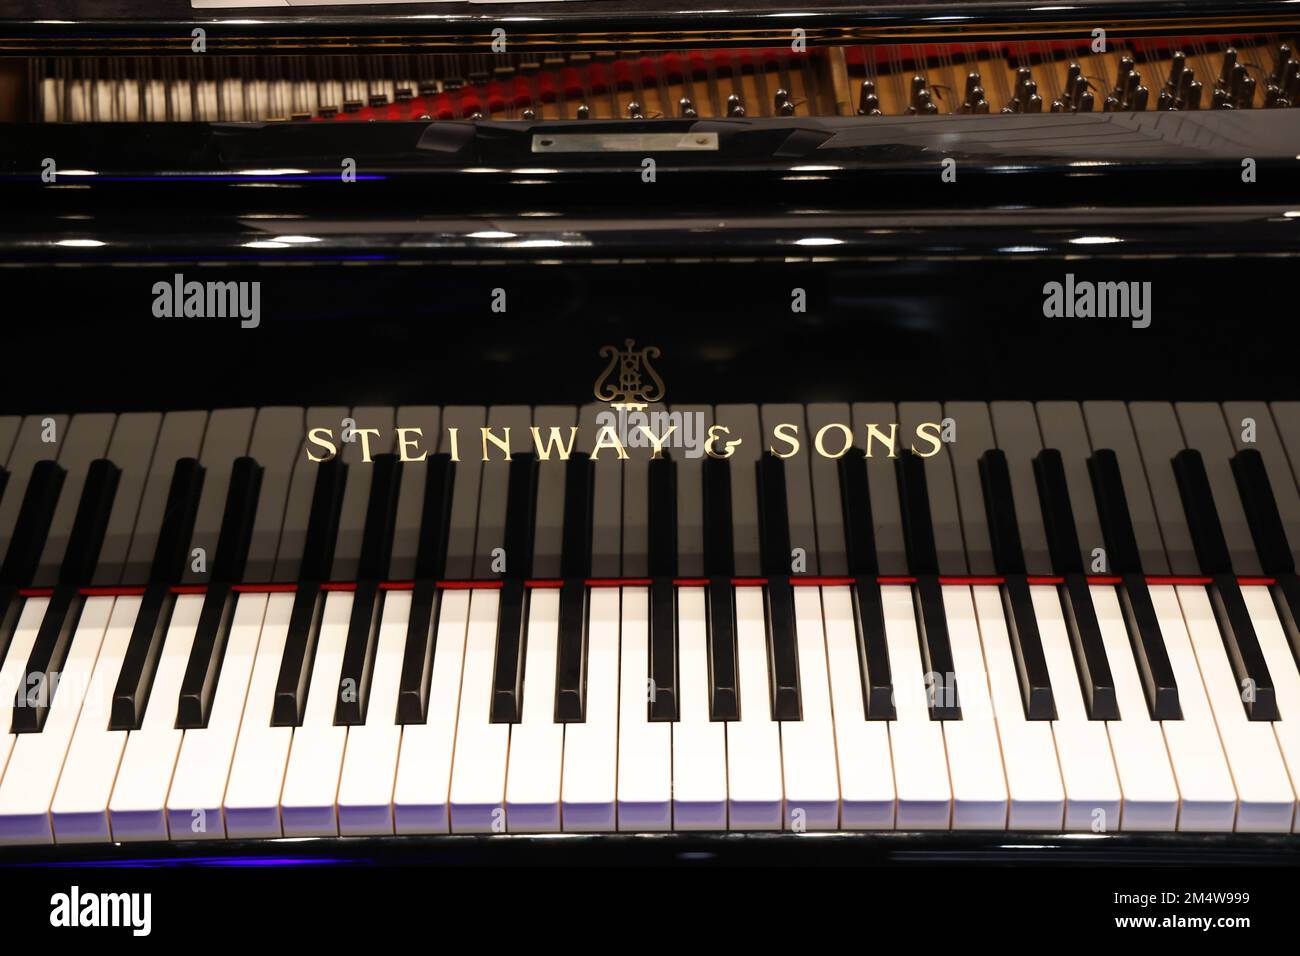 Keyboard of a shiny black piano with brand name visible: Steinway & Sons Stock Photo